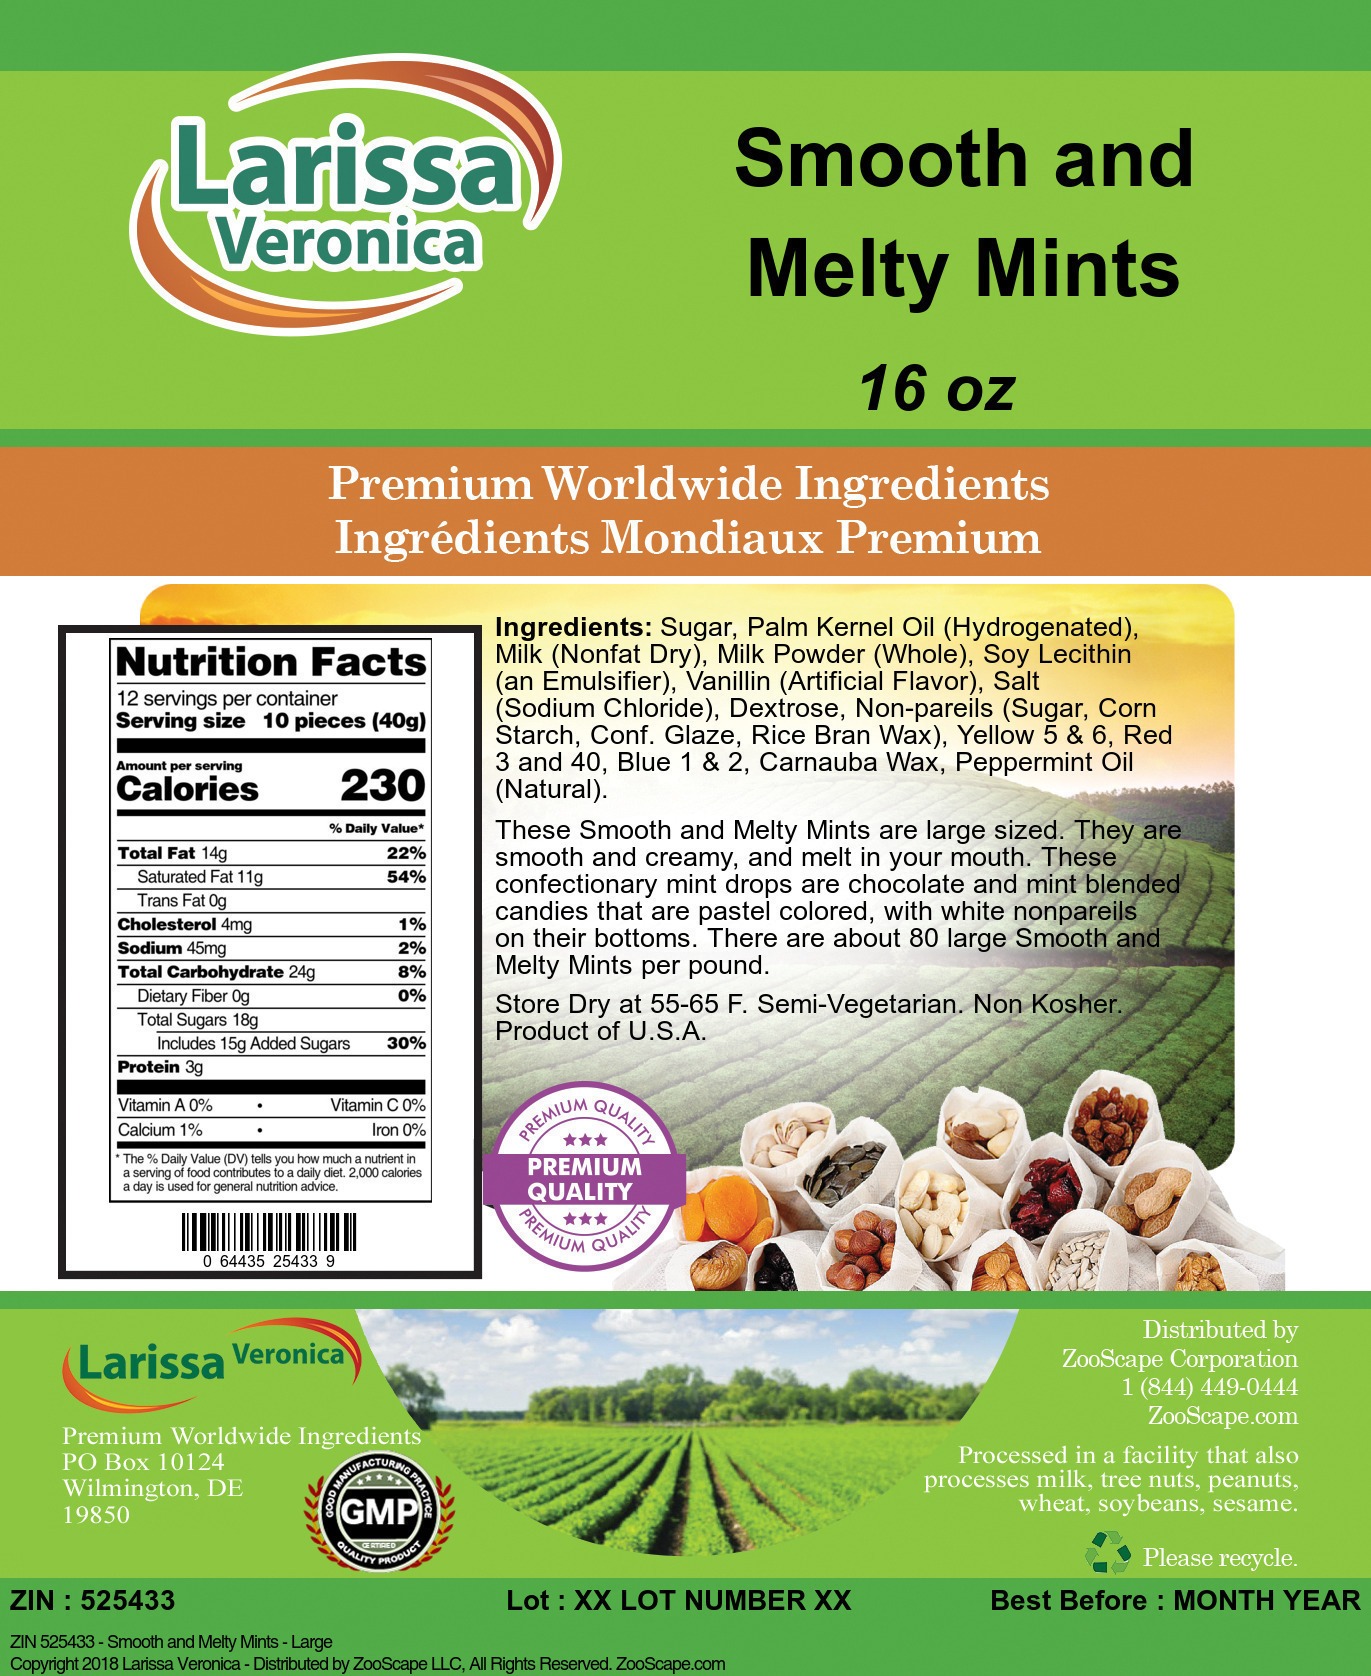 Smooth and Melty Mints - Large - Label